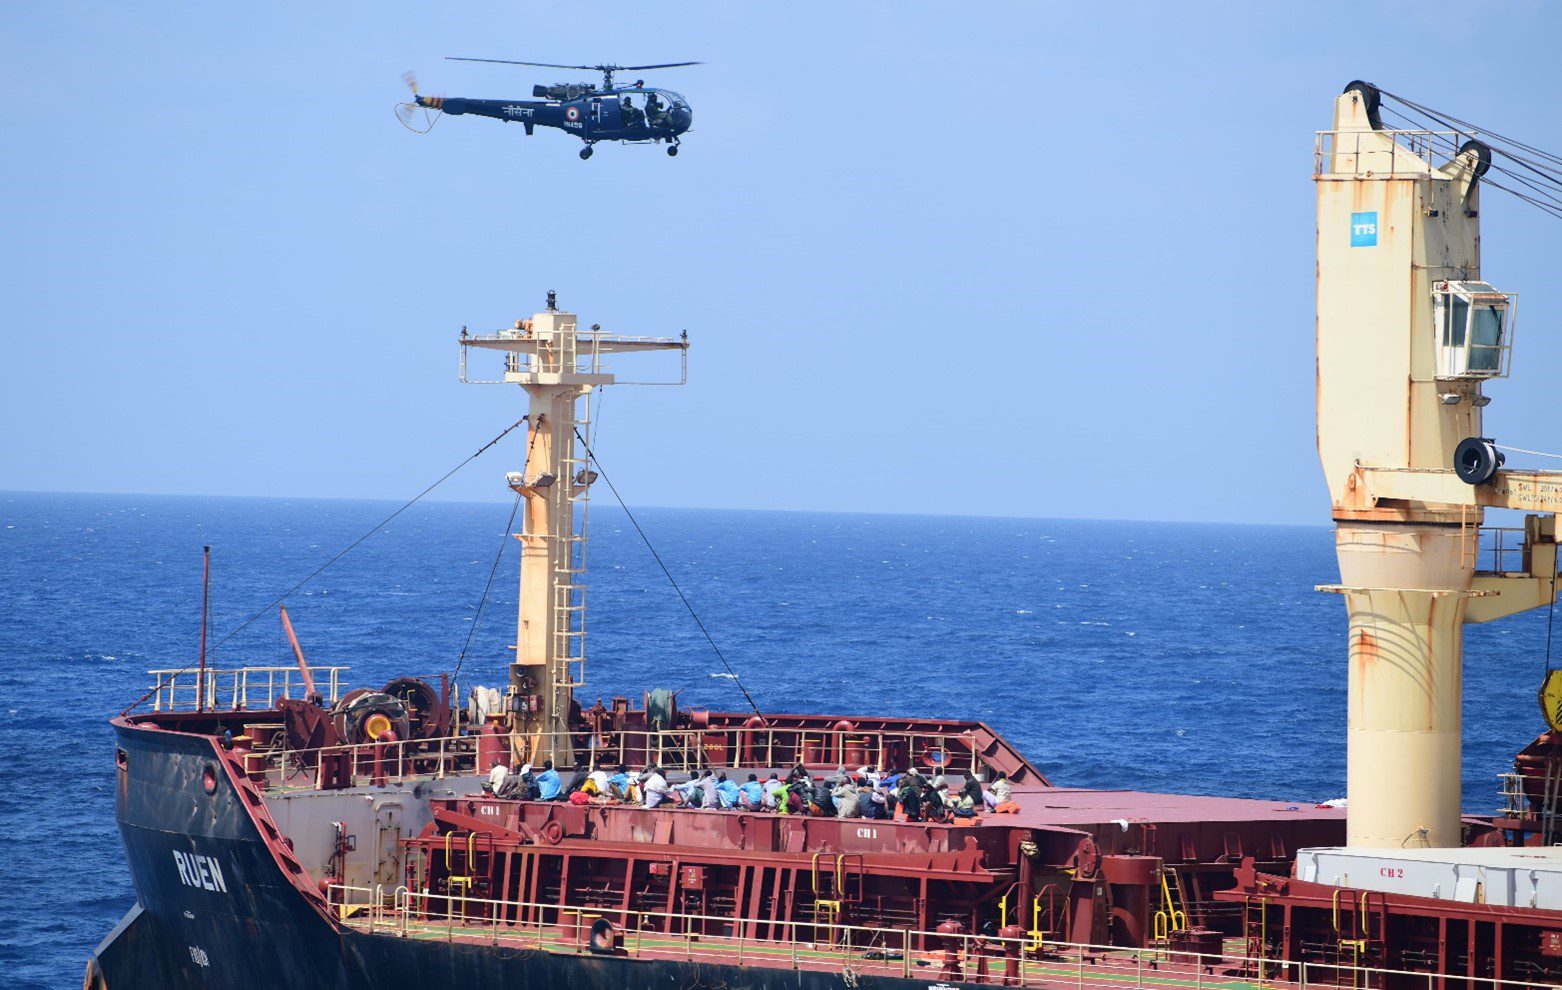 An Indian Navy helicopter hovers over captured pirates on the deck of the MV Ruen after retaking the ship. Photo courtesy Indian Navy